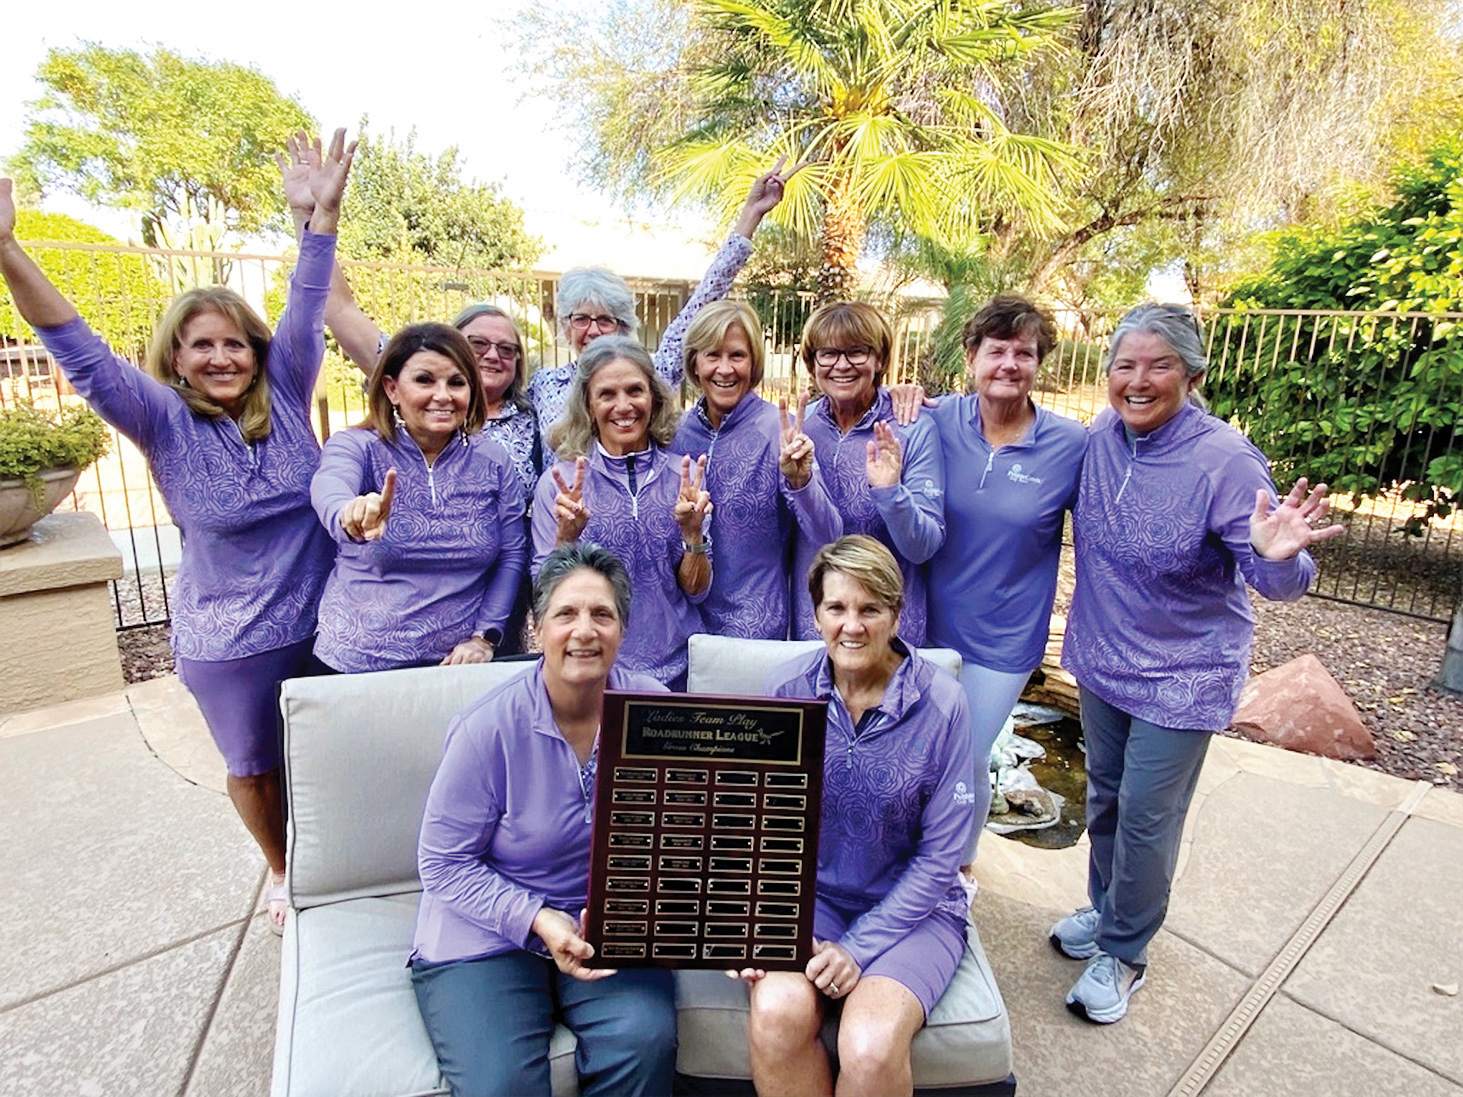 2020-21 Roadrunner League Champions (left to right) back row: Cindy Sota, Amber Rivera, Layne Sheridan, Susan Slaughter, Marilyn Reynolds, Mary Harris, Kathy Hubert-Wyss, Sheri Sears, and Ellen Enright; front row: co-captains Andrea Dilger and Sharon Hadley; not present: Monica Lee and Suzanne Kanaly